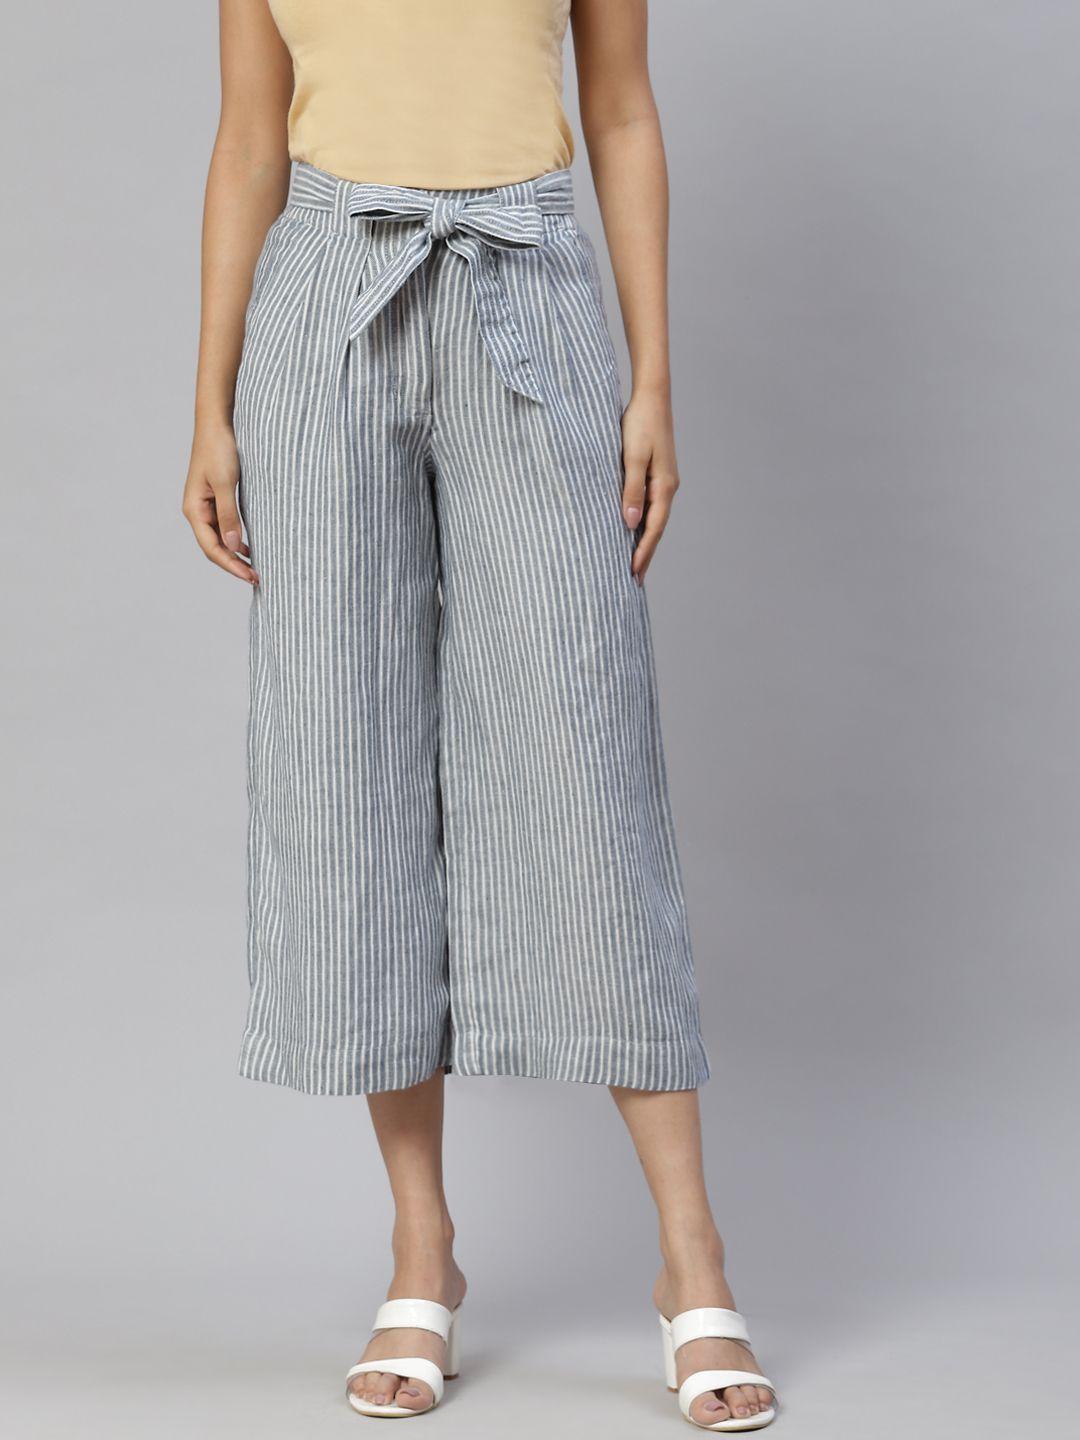 marks-&-spencer-women-navy-blue-striped-high-rise-pleated-culottes